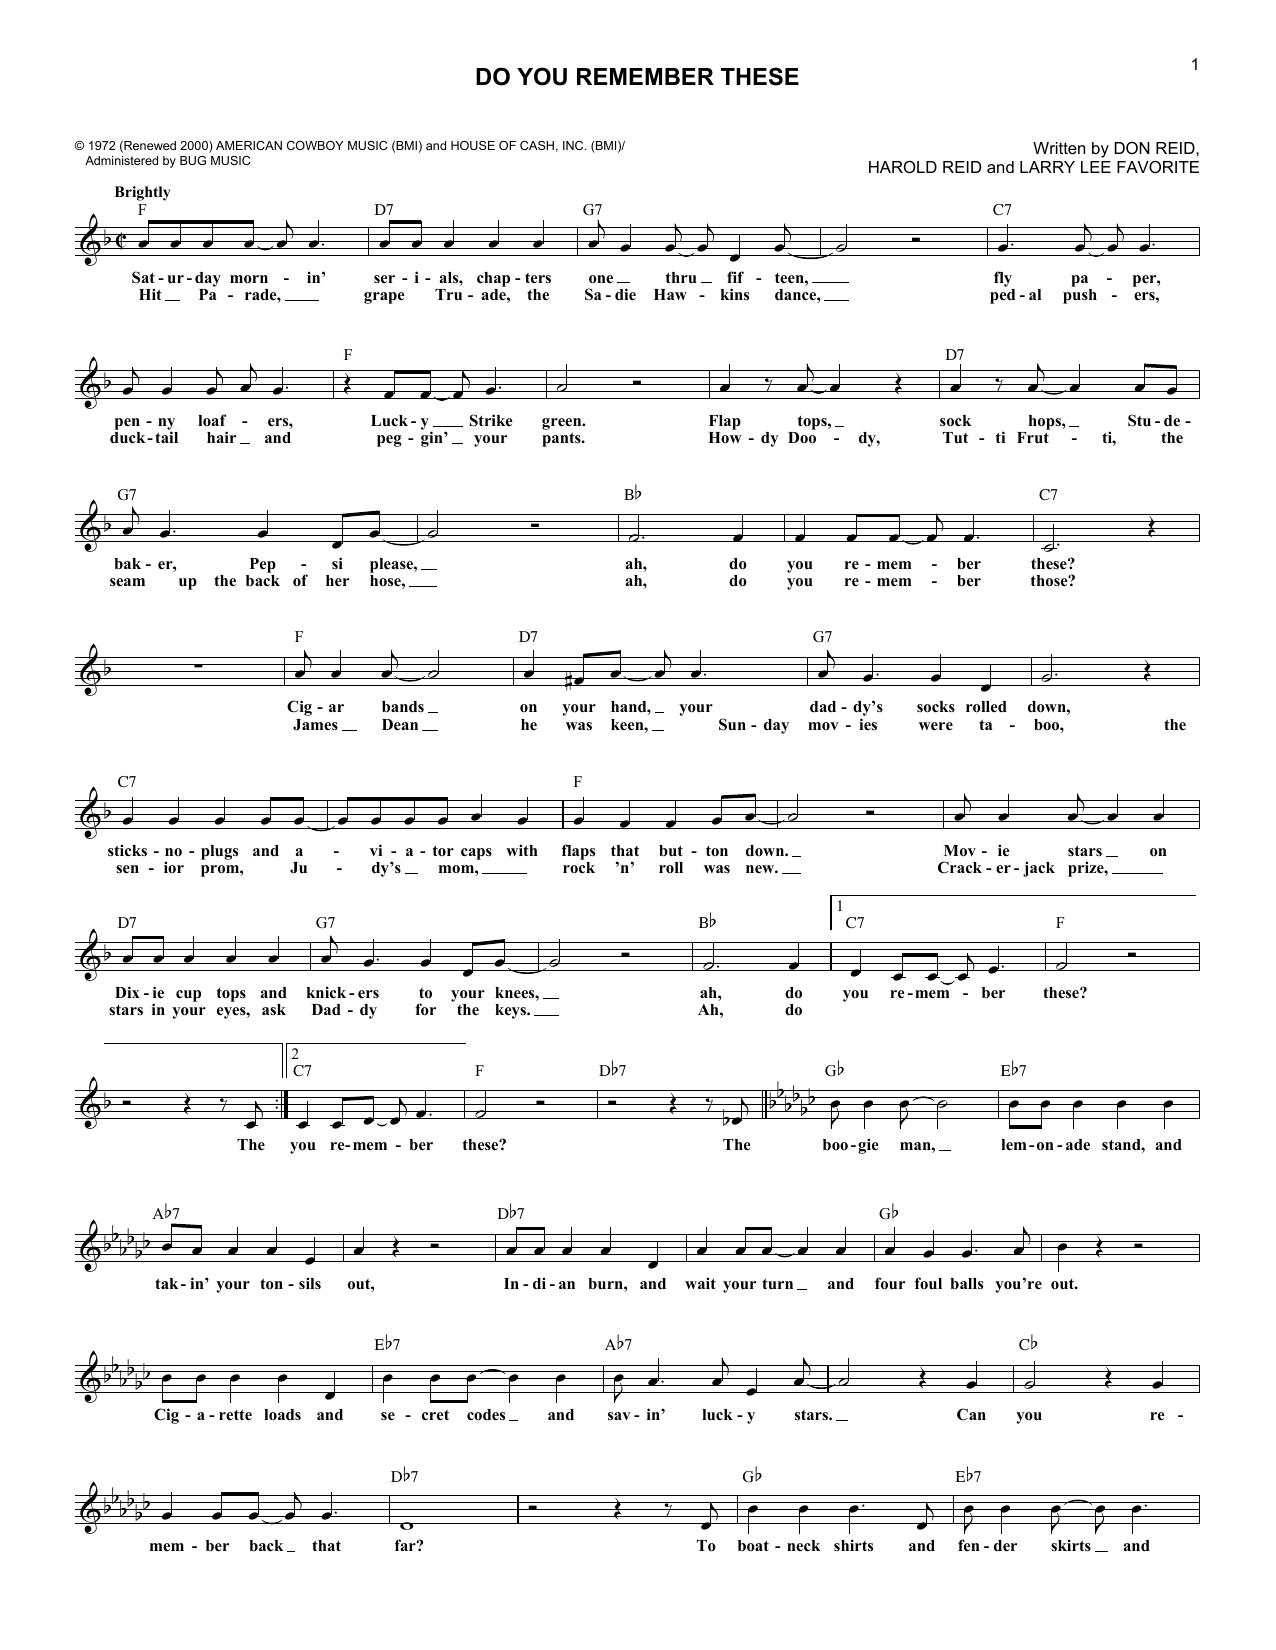 Download The Statler Brothers Do You Remember These Sheet Music